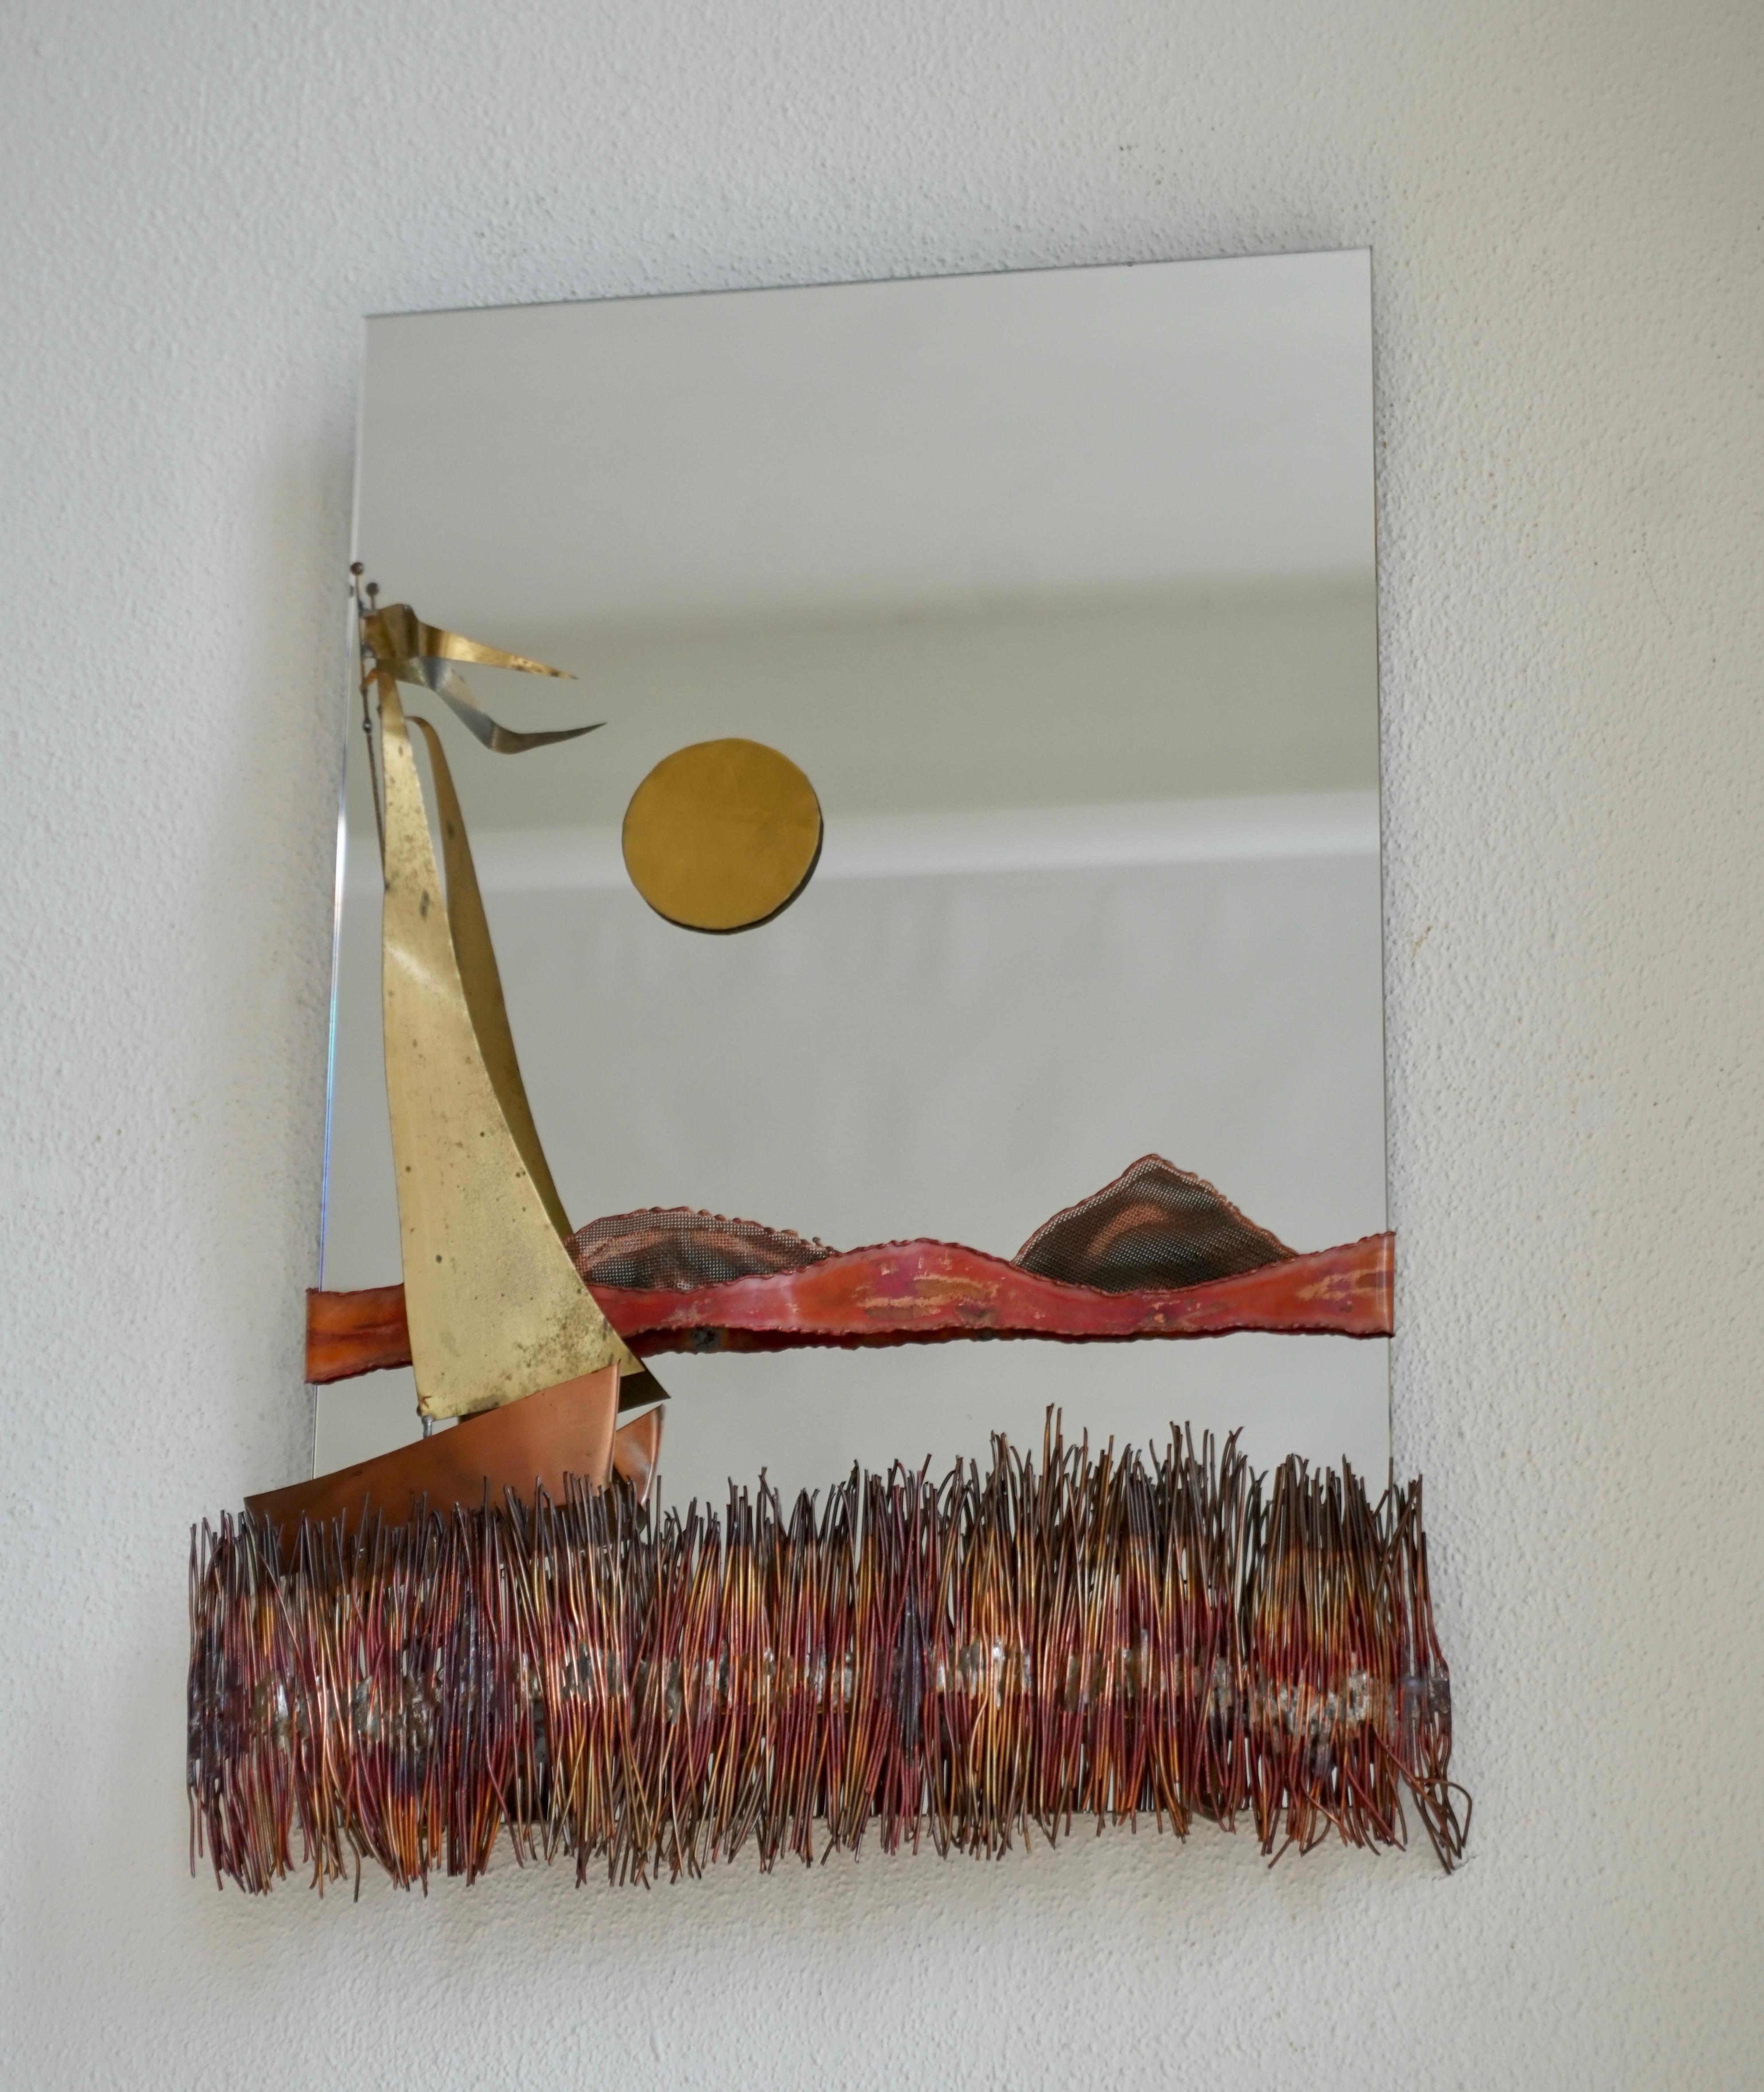 Hollywood Regency Style And 1970s Copper And Brass Wall Mounted Sculpture Mirror made by Daniel d'Haeseleer, Belgium, 1970. This eyecatcher piece is made of brass and copper details. This scultpure mirror is showing a sailboot and poetic sunset over